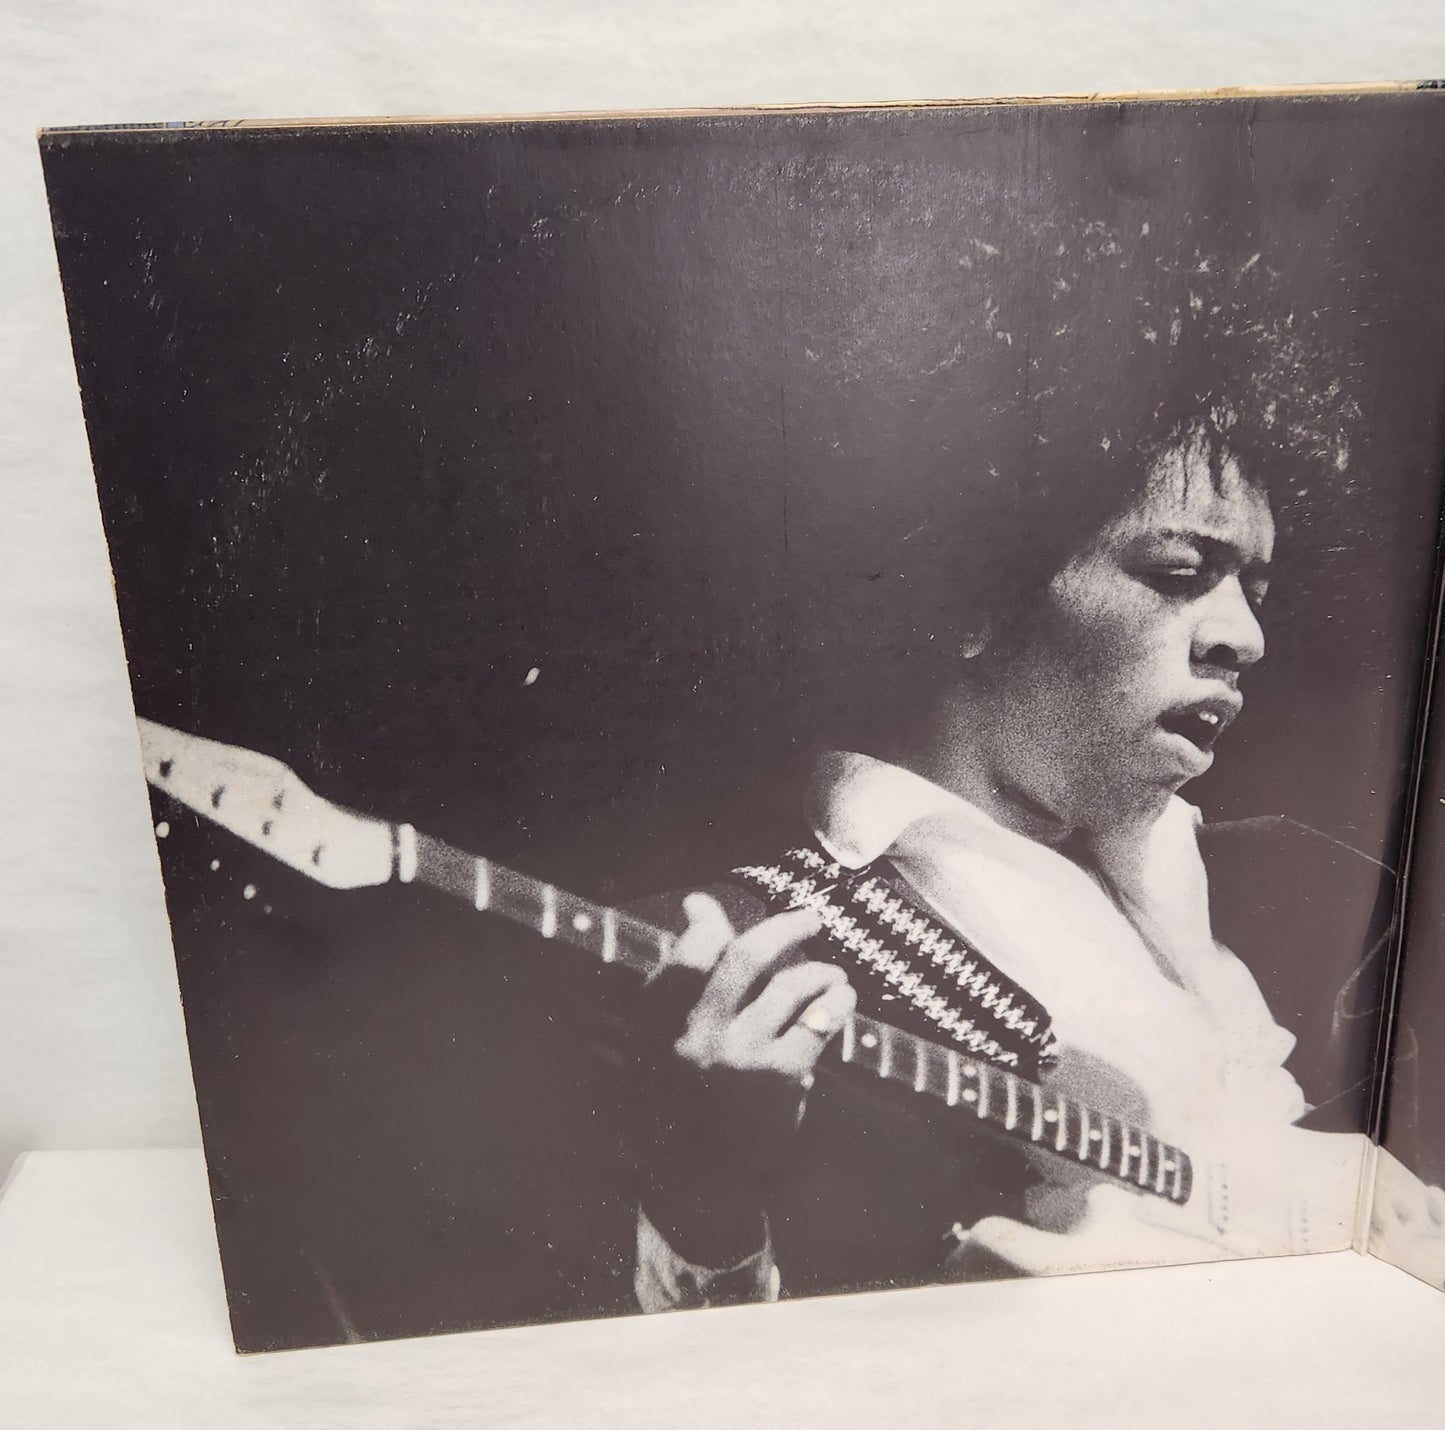 Jimi Hendrix  "Are You Experienced, Axis: Bold As Love" Psych Blues Rock 2 LP Album (France)